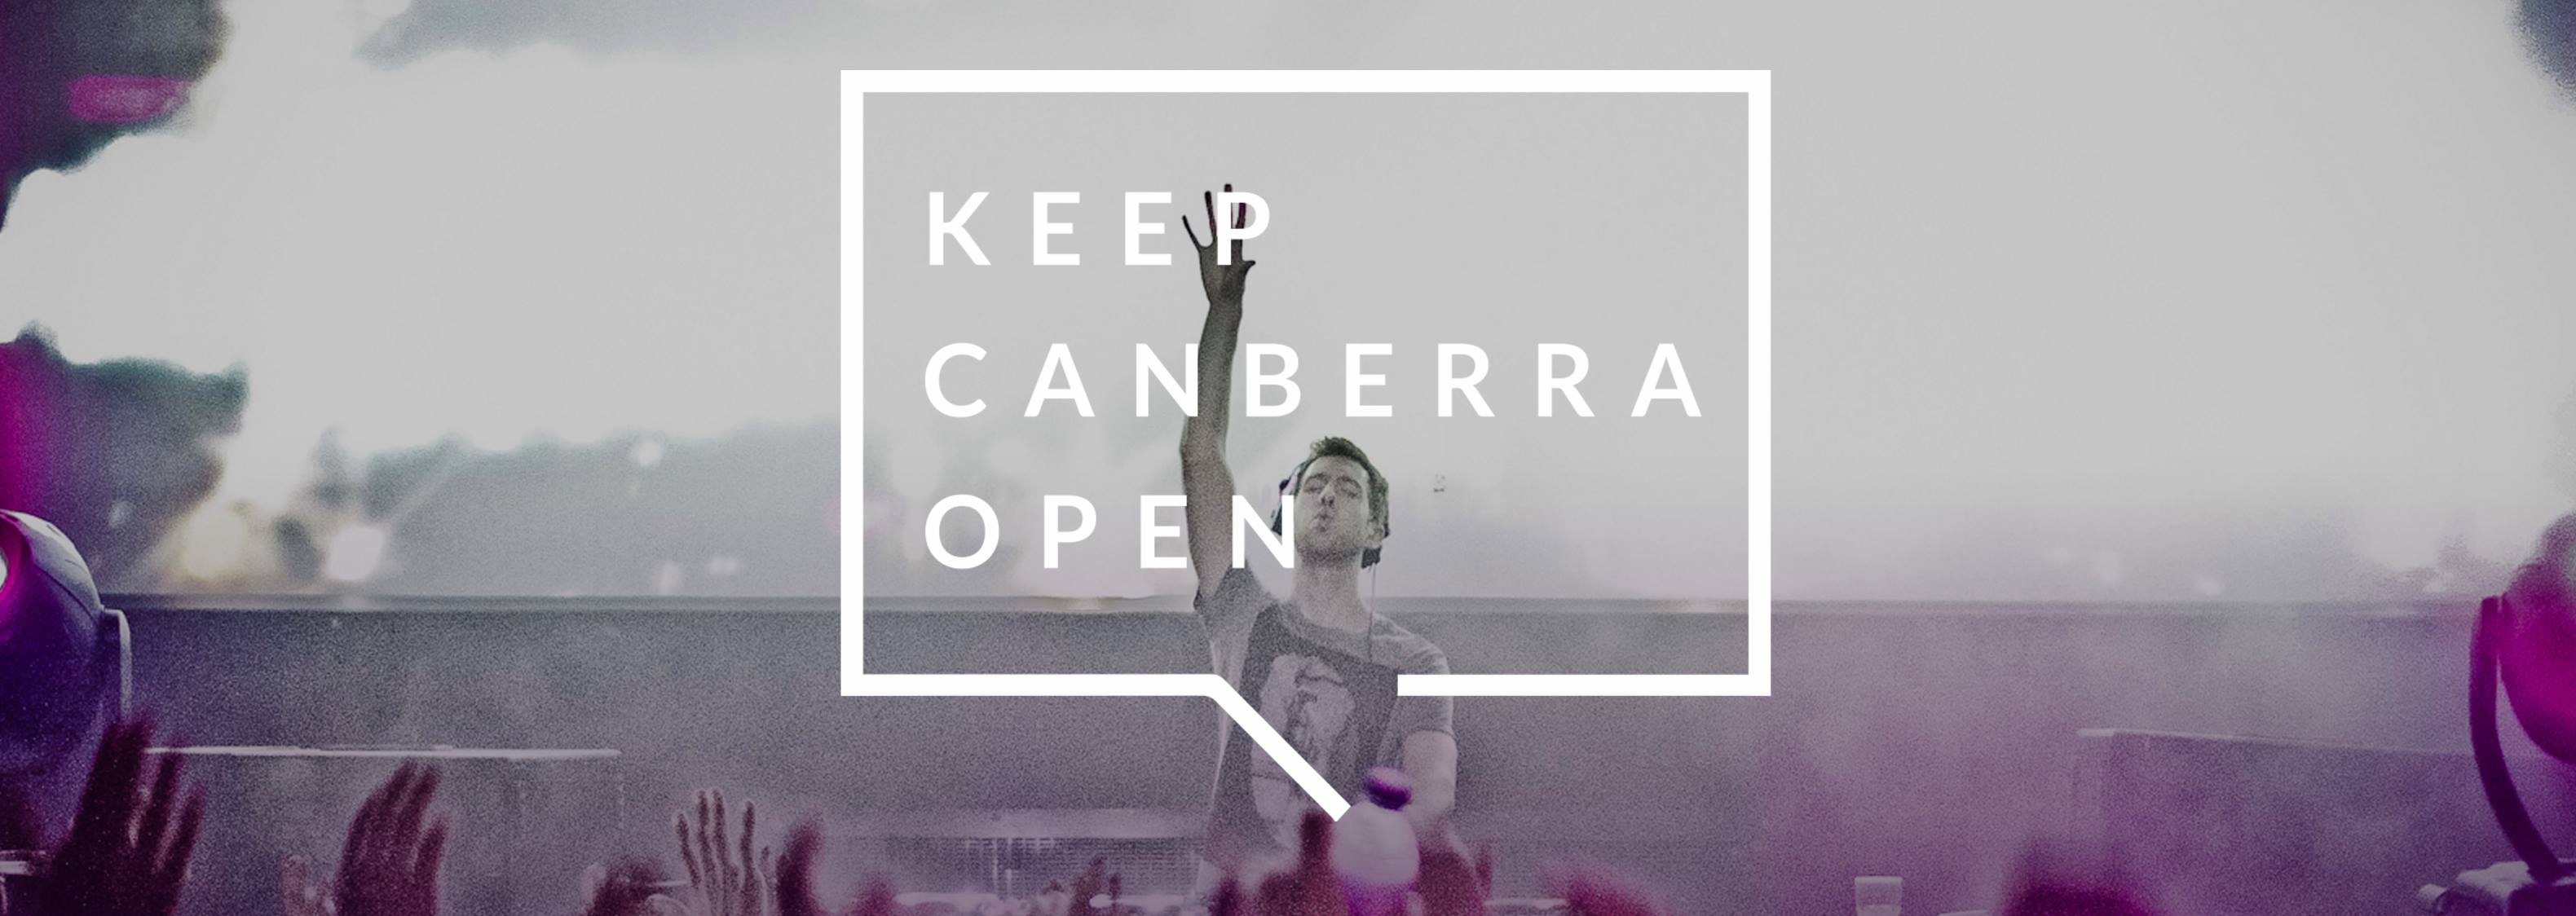 Keep Canberra Open announces rally over proposed changes